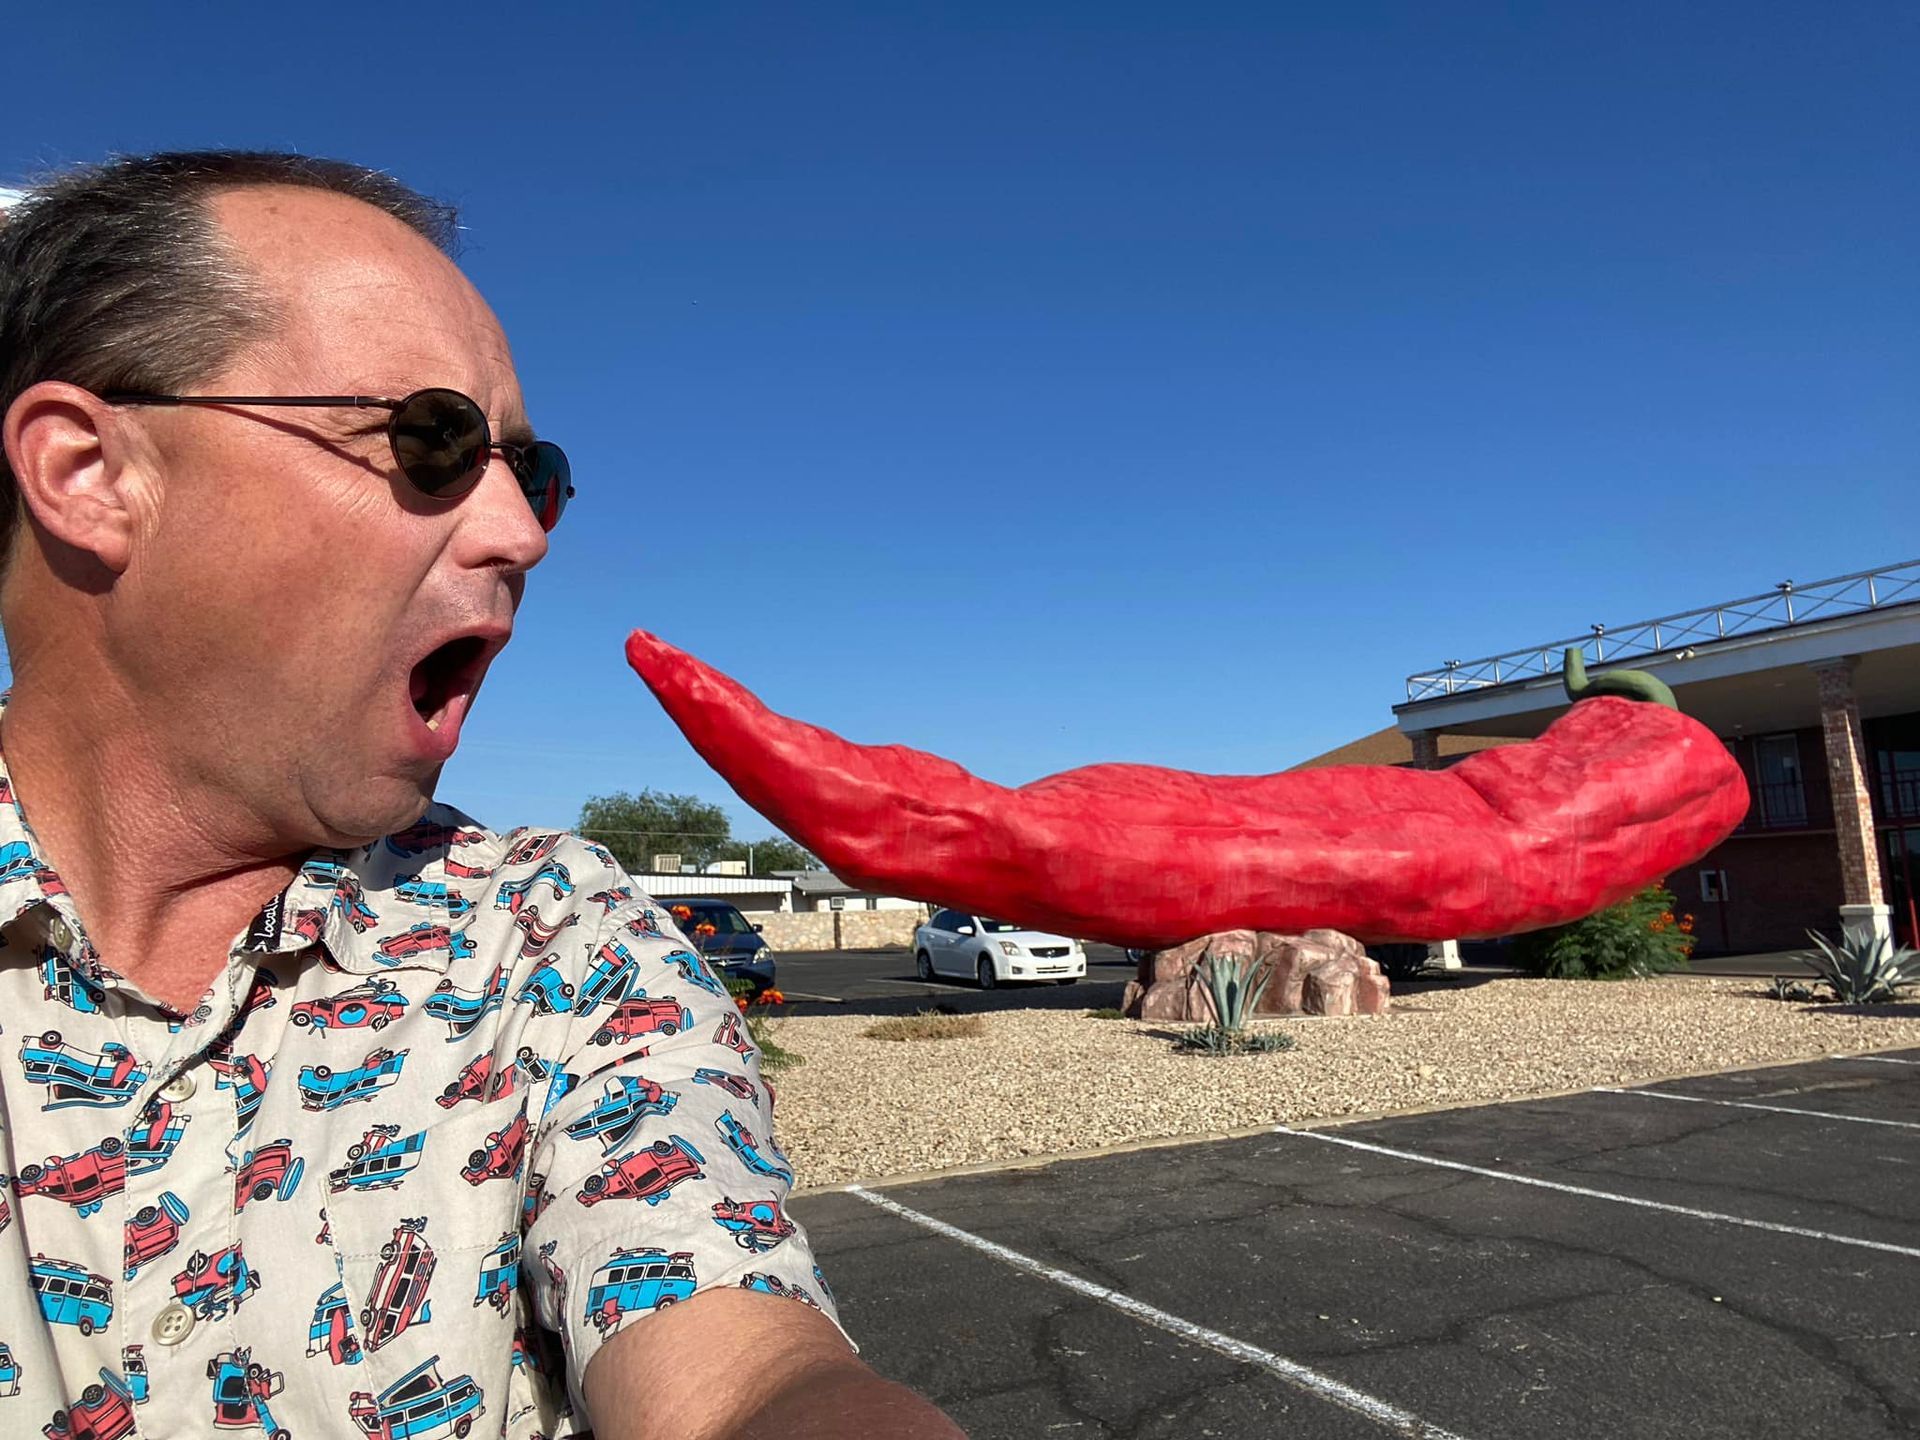 World's Largest Chile Pepper Sculpture, world record in Las Cruces, New Mexico
